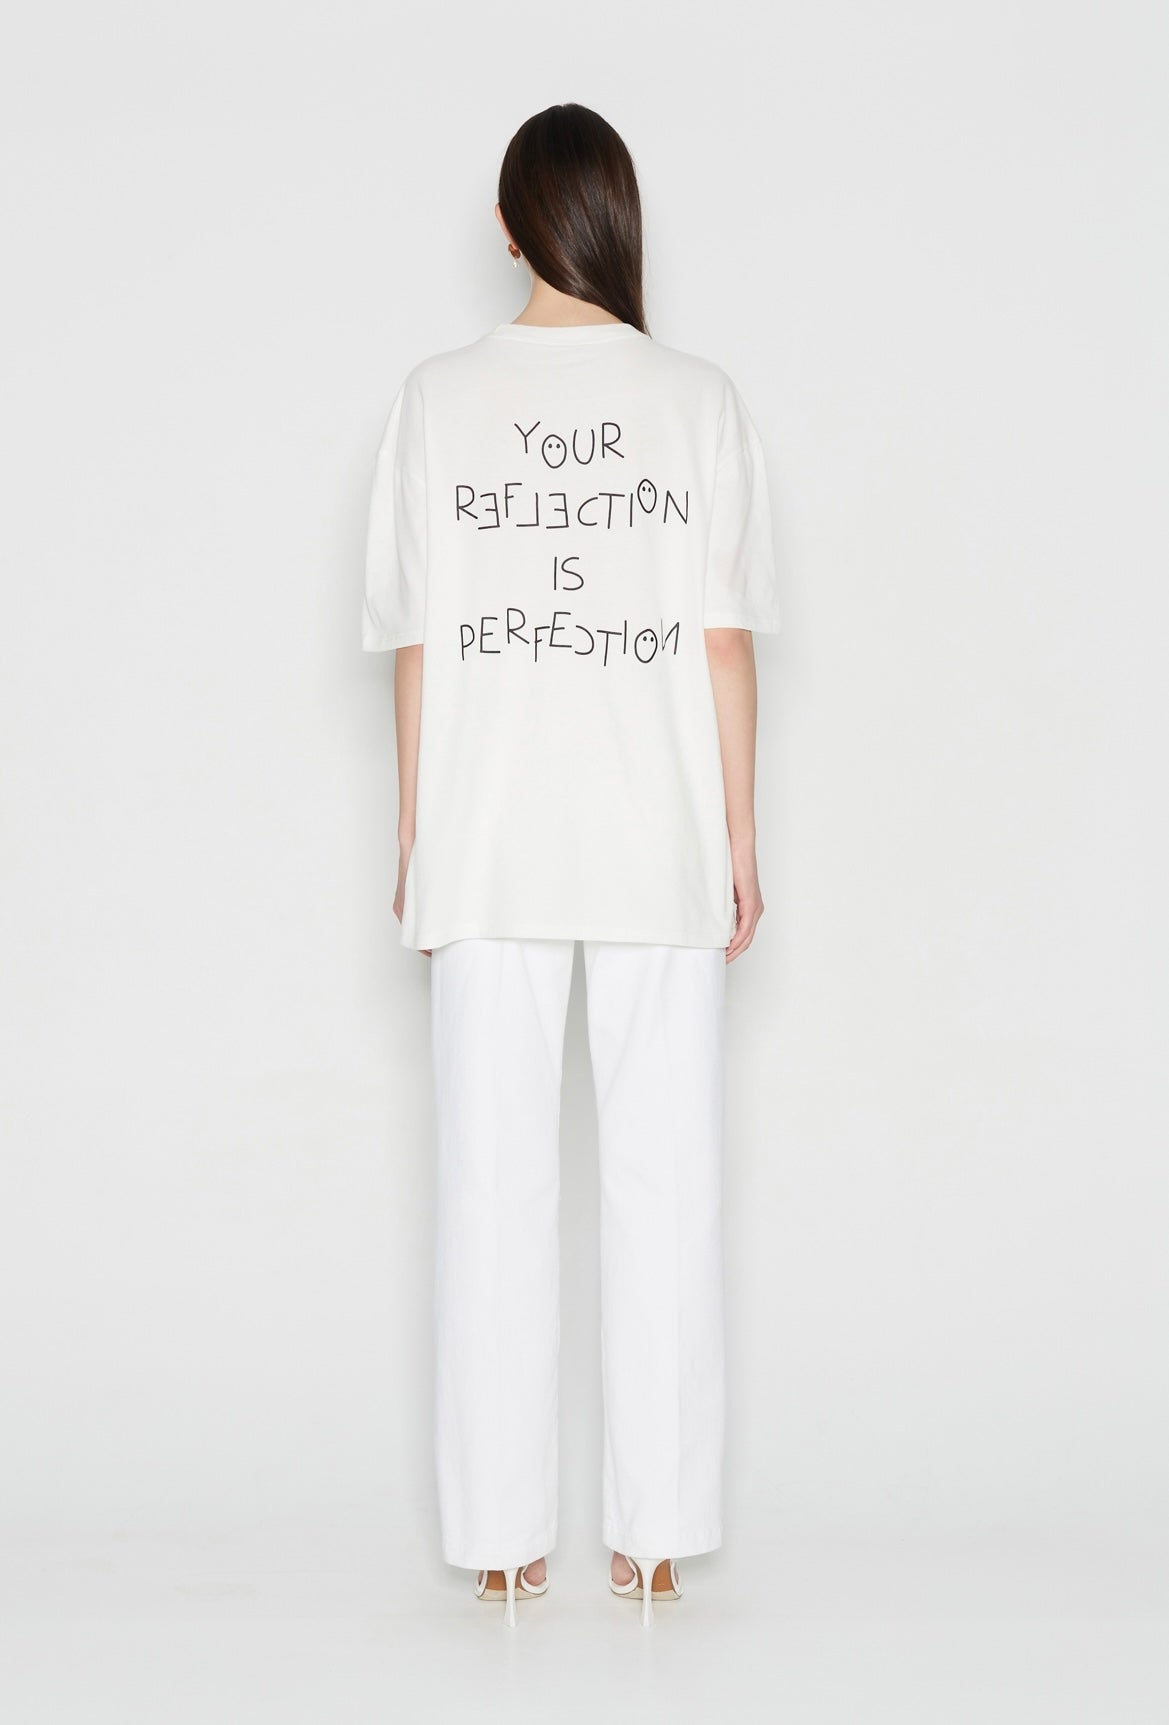 REFLECTED PERFECTION T-SHIRT- WHITE